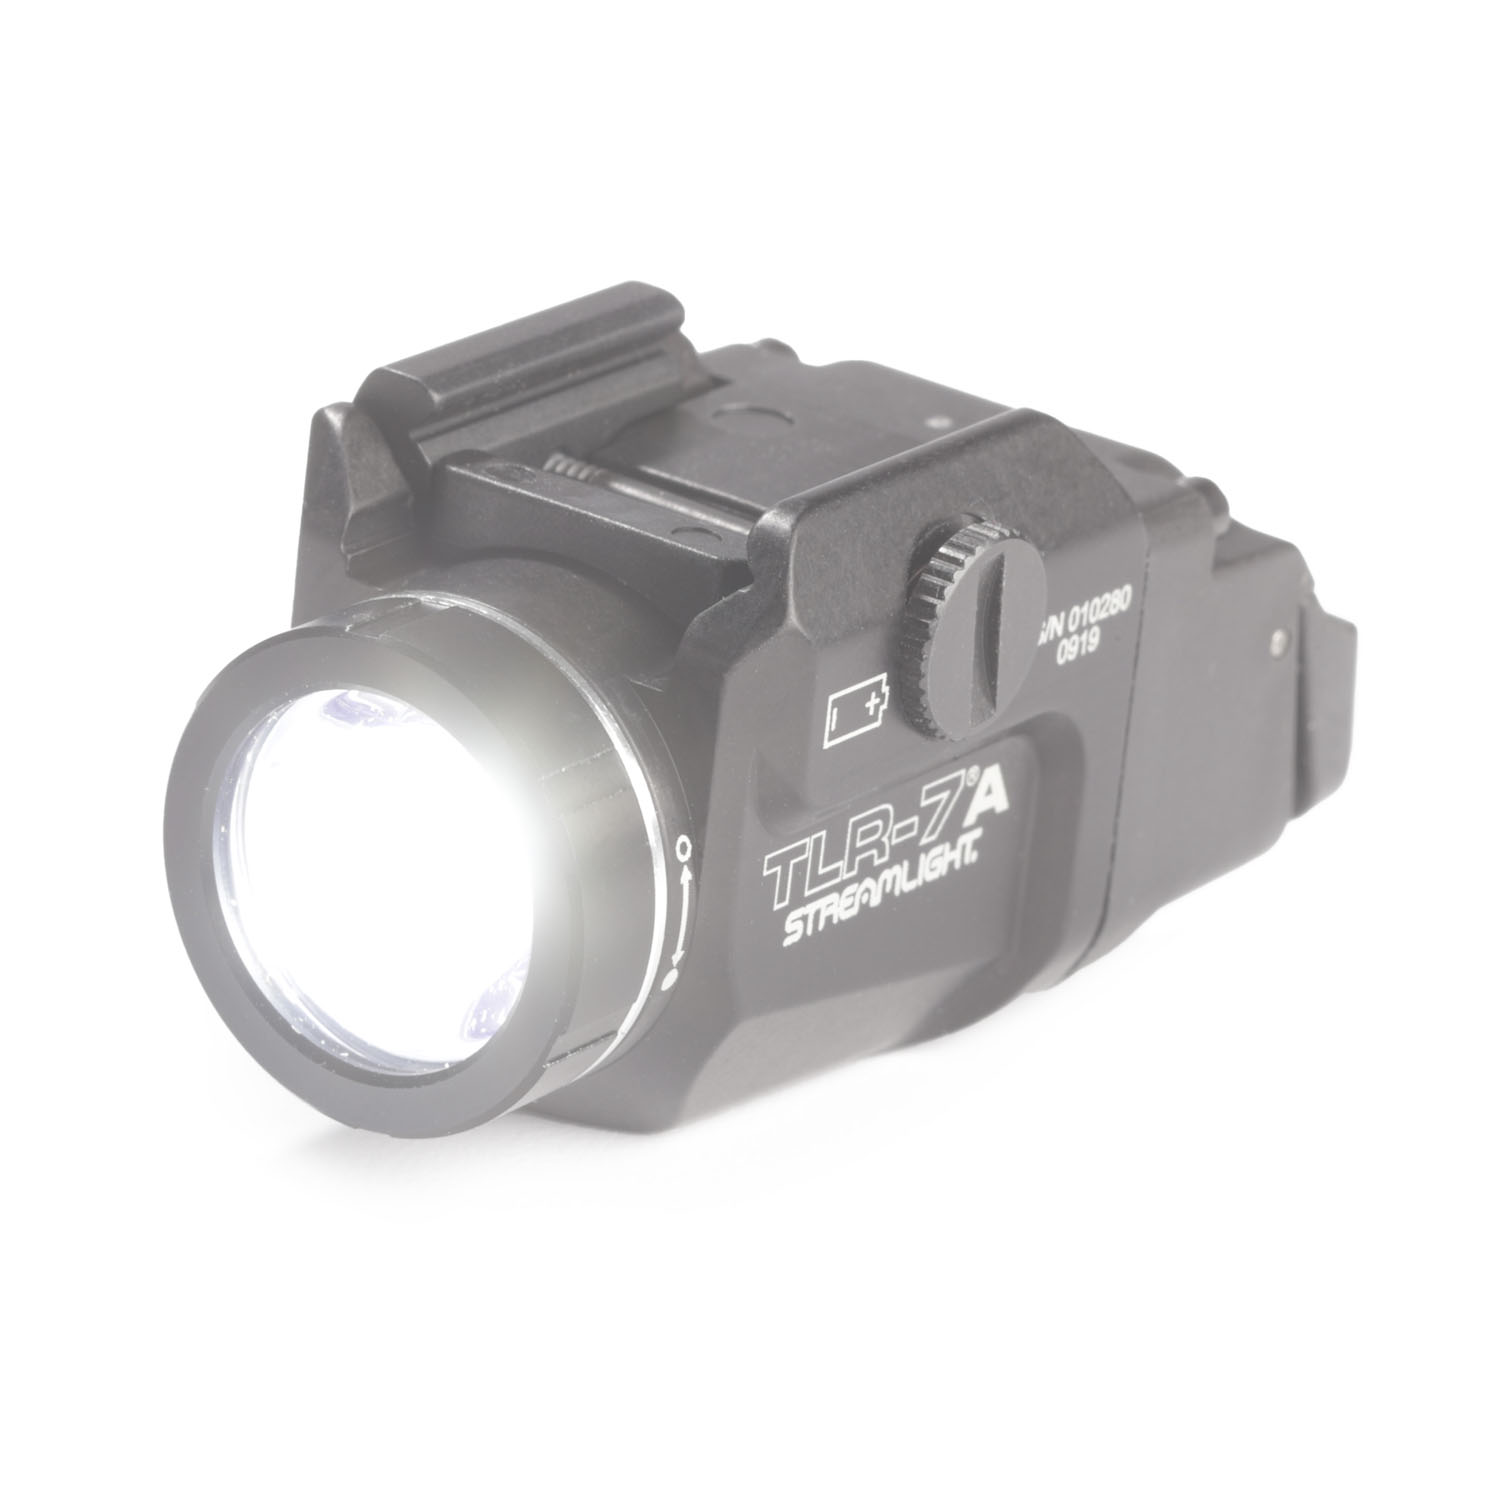 Streamlight TLR-7 A Flex Weapon Light with Ambidextrous Swit